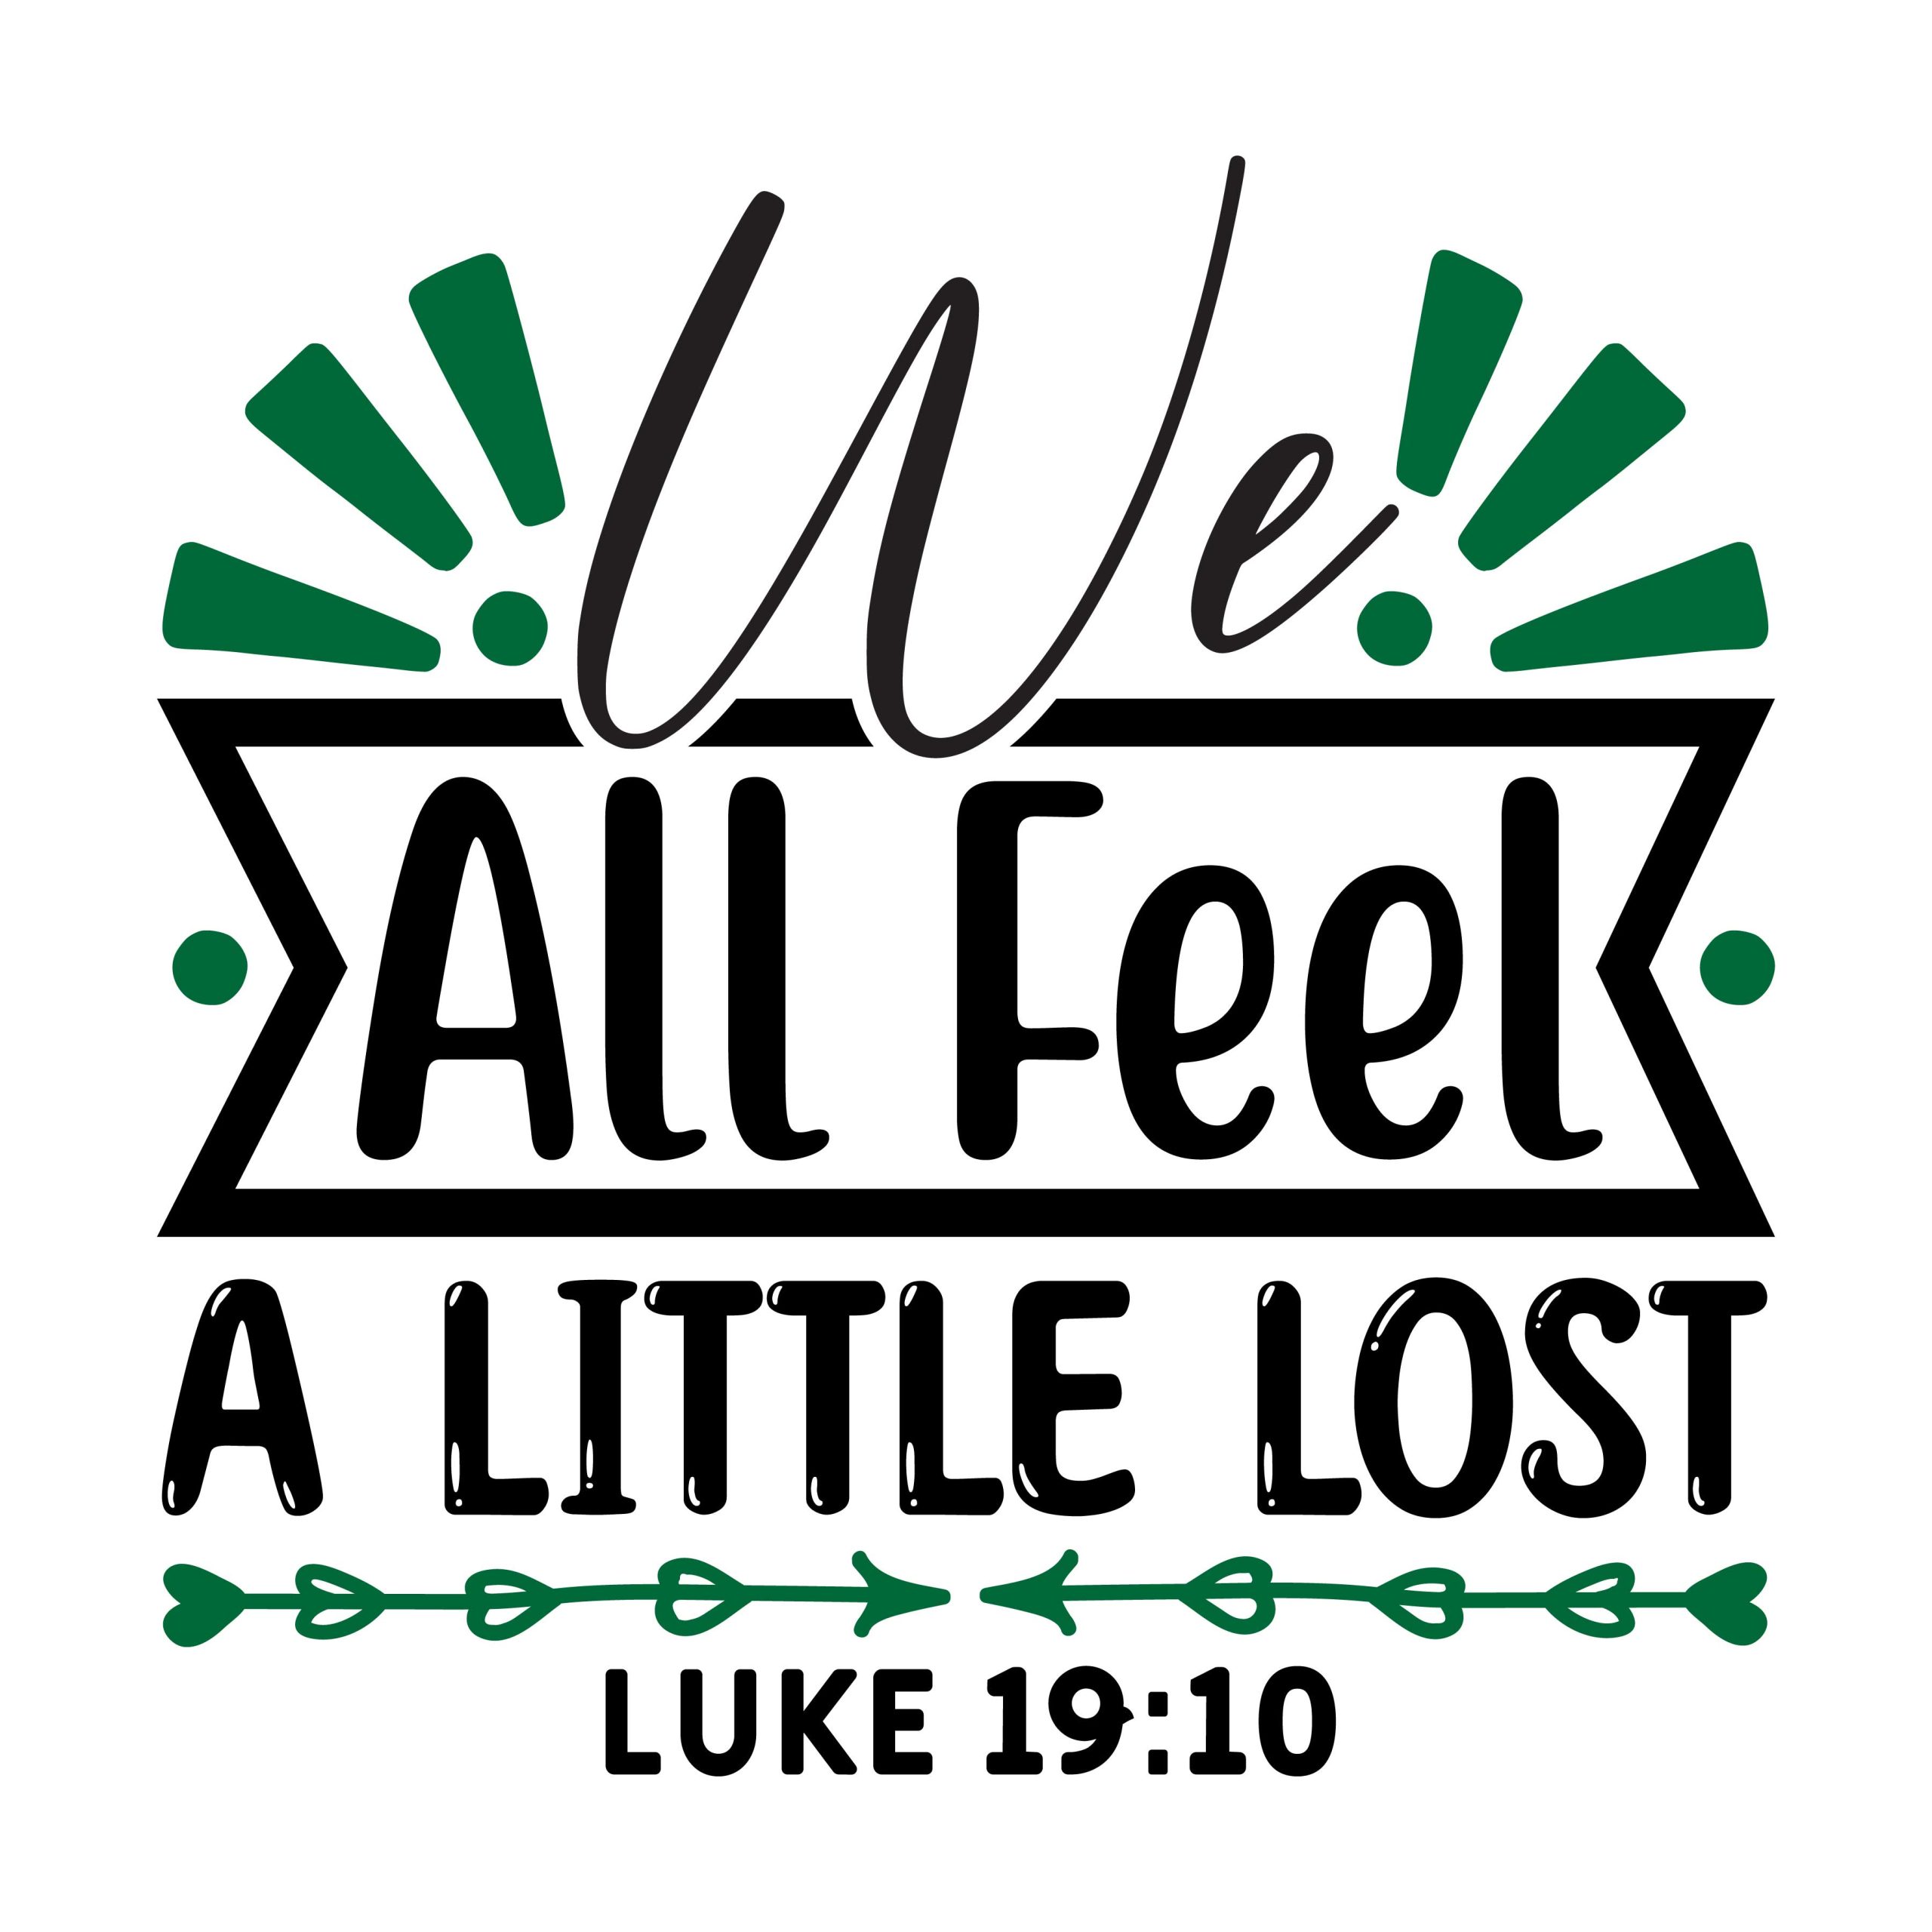 We all feel a little lost Luke 14:27, bible verses, scripture verses, svg files, passages, sayings, cricut designs, silhouette, embroidery, bundle, free cut files, design space, vector